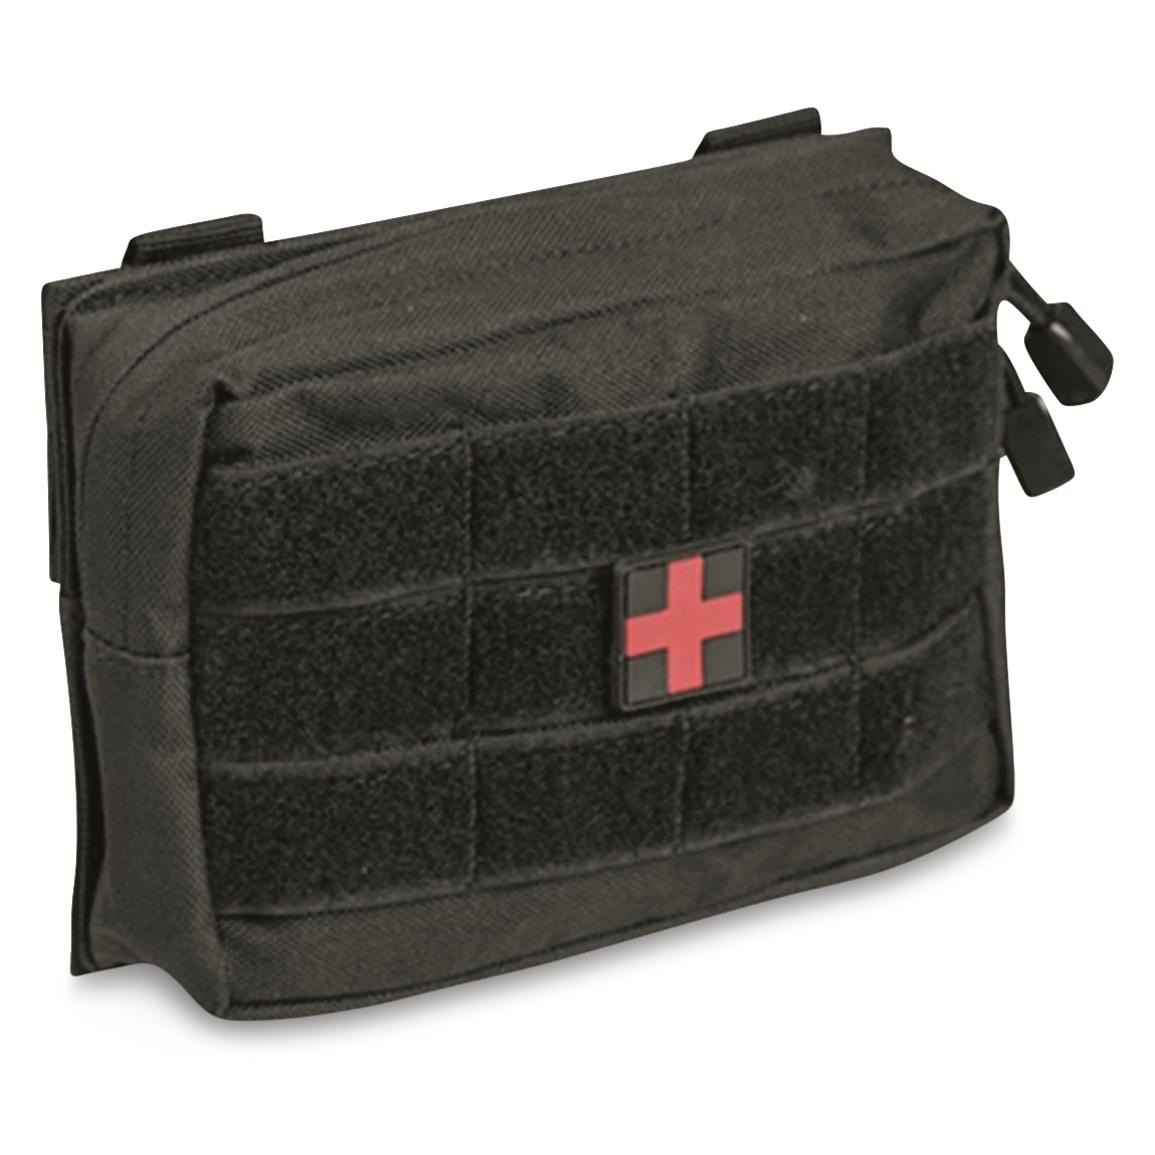 Mil-Tec First Aid Kit with MOLLE Pouch, 25 Pieces, Black